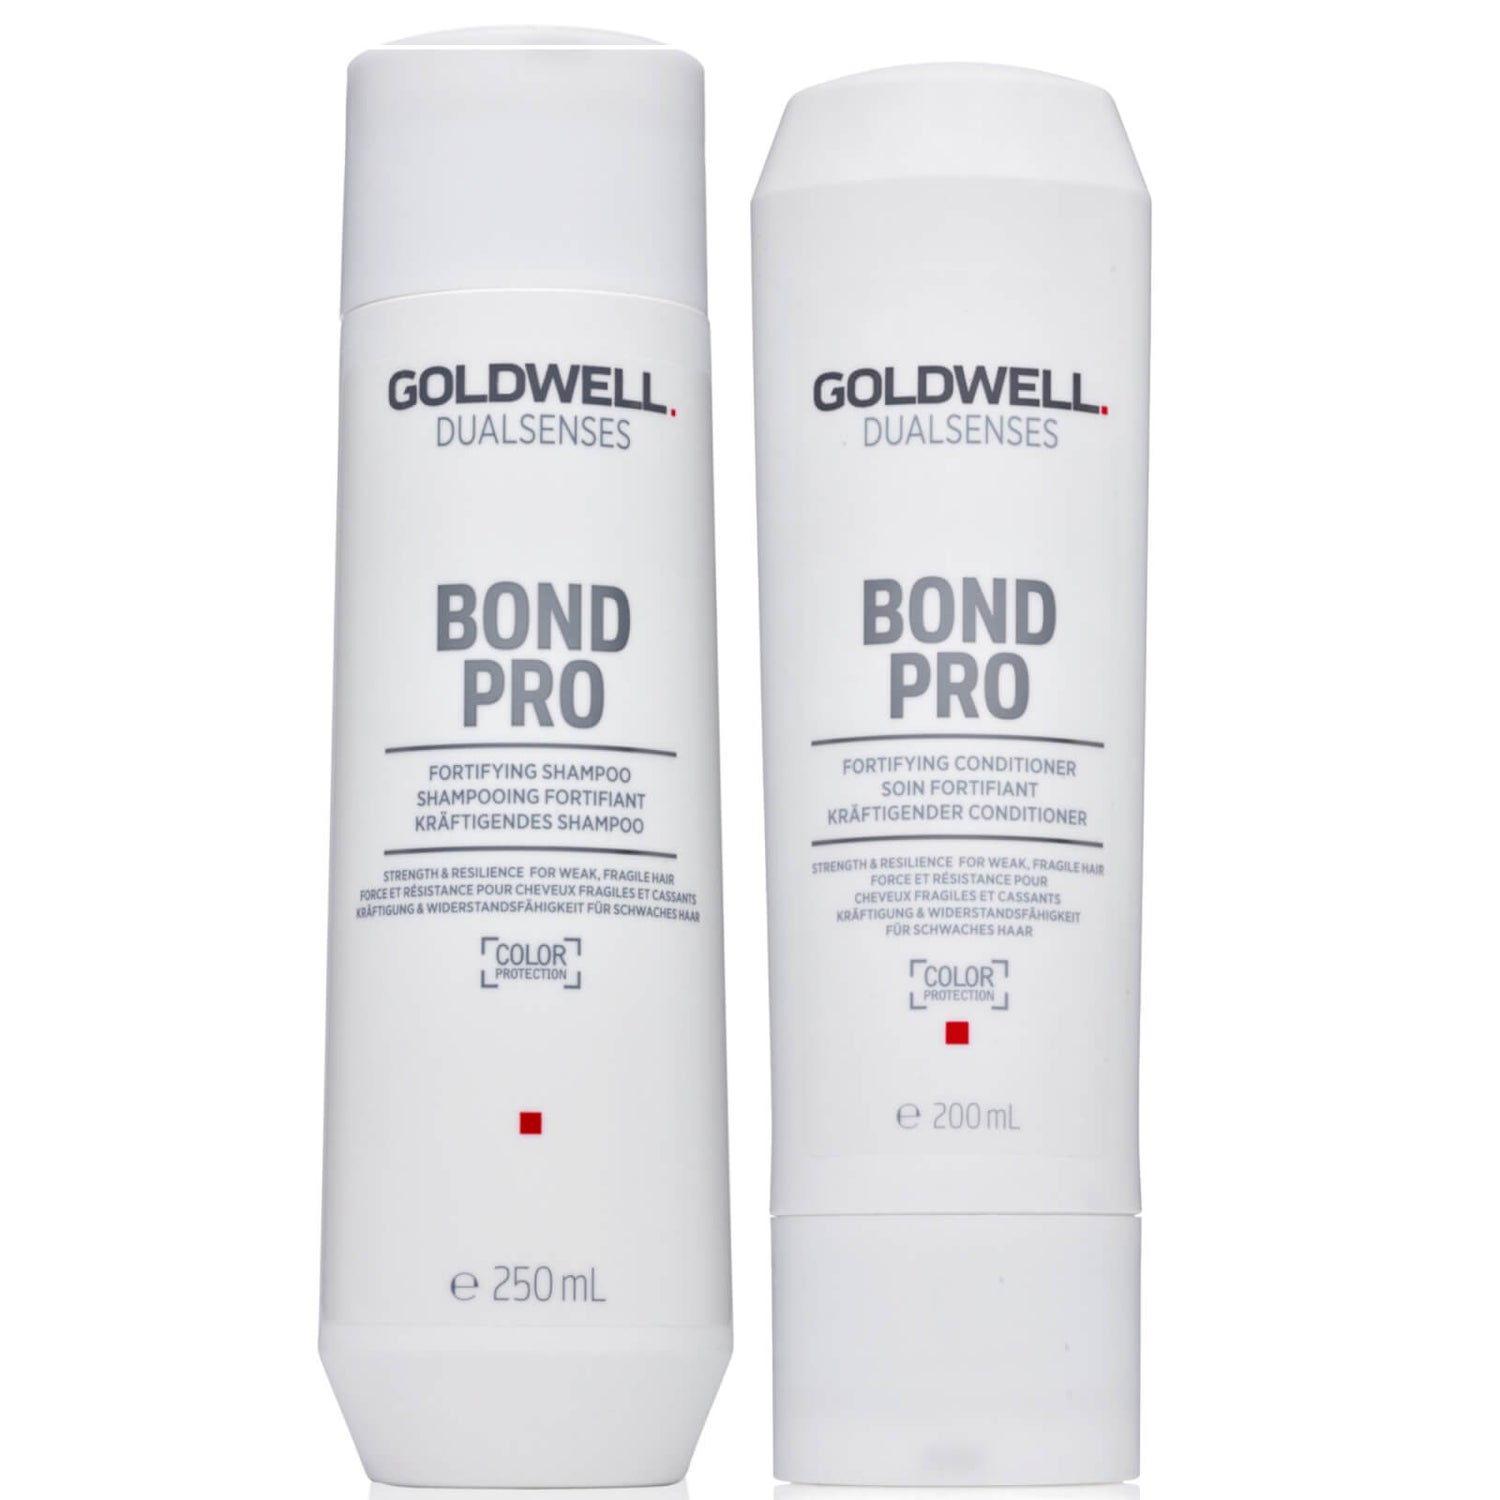 Goldwell Dualsenses Bond Pro Shampoo and Conditioner Duo For Weak, Damaged Hair (Worth £30.80)